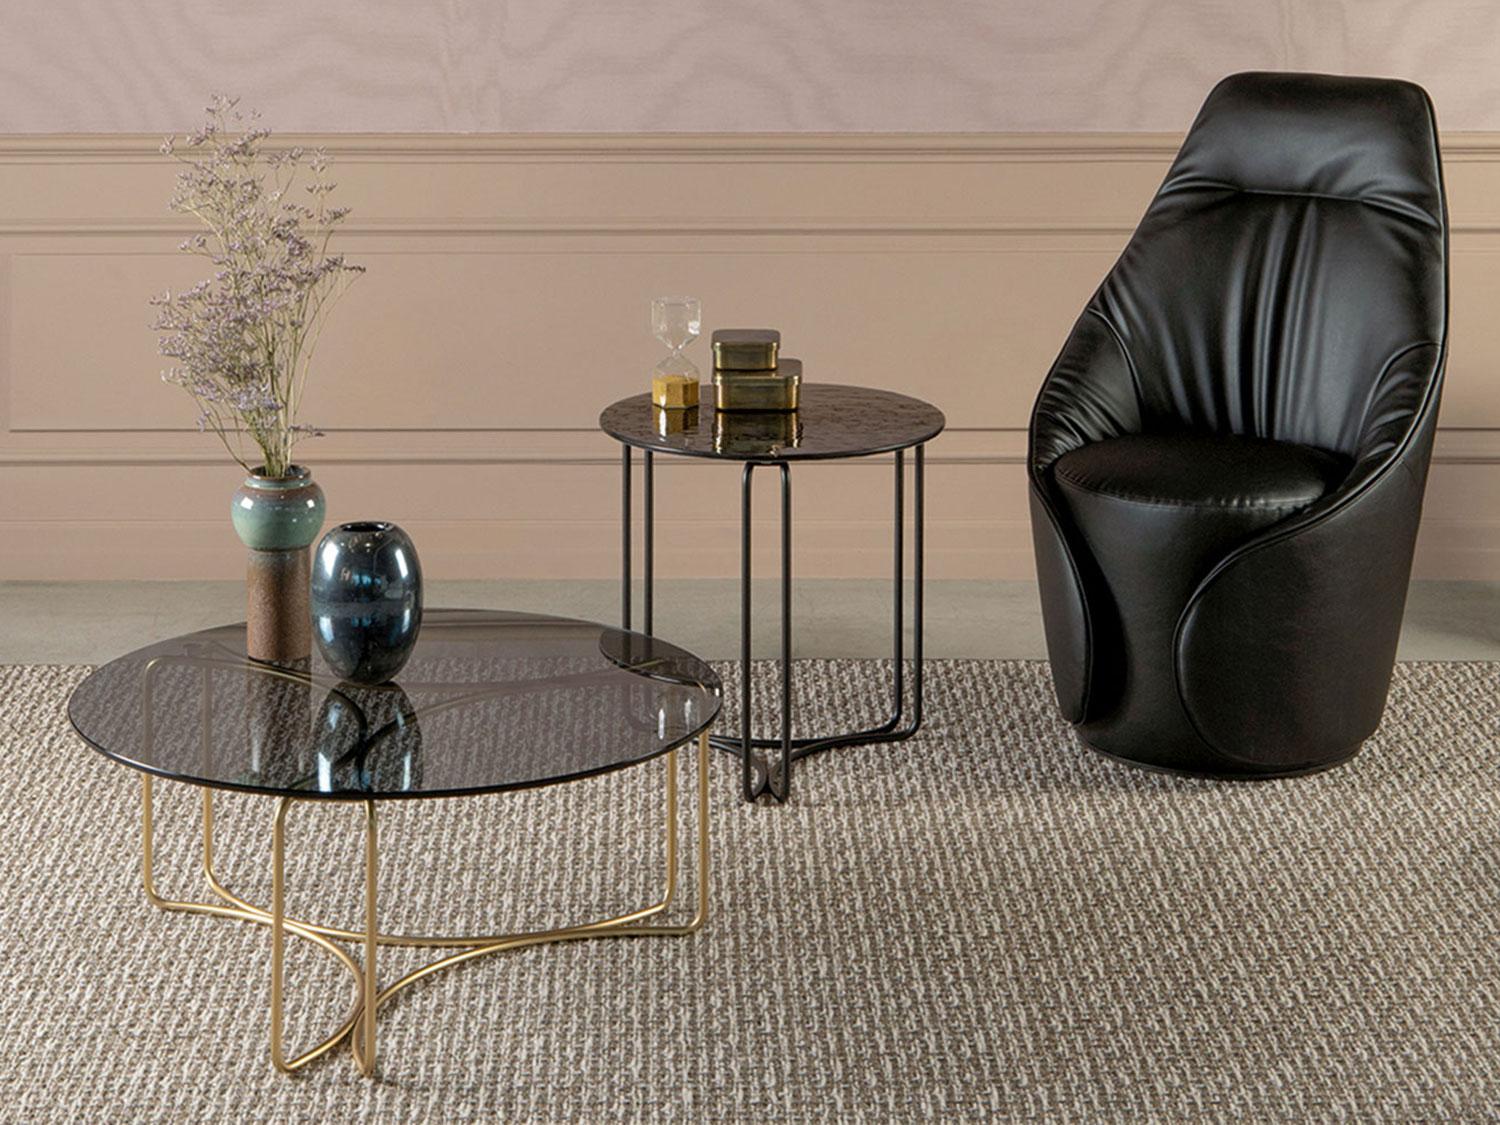 Jazz coffee table with metal and glass | DIOTTI.COM